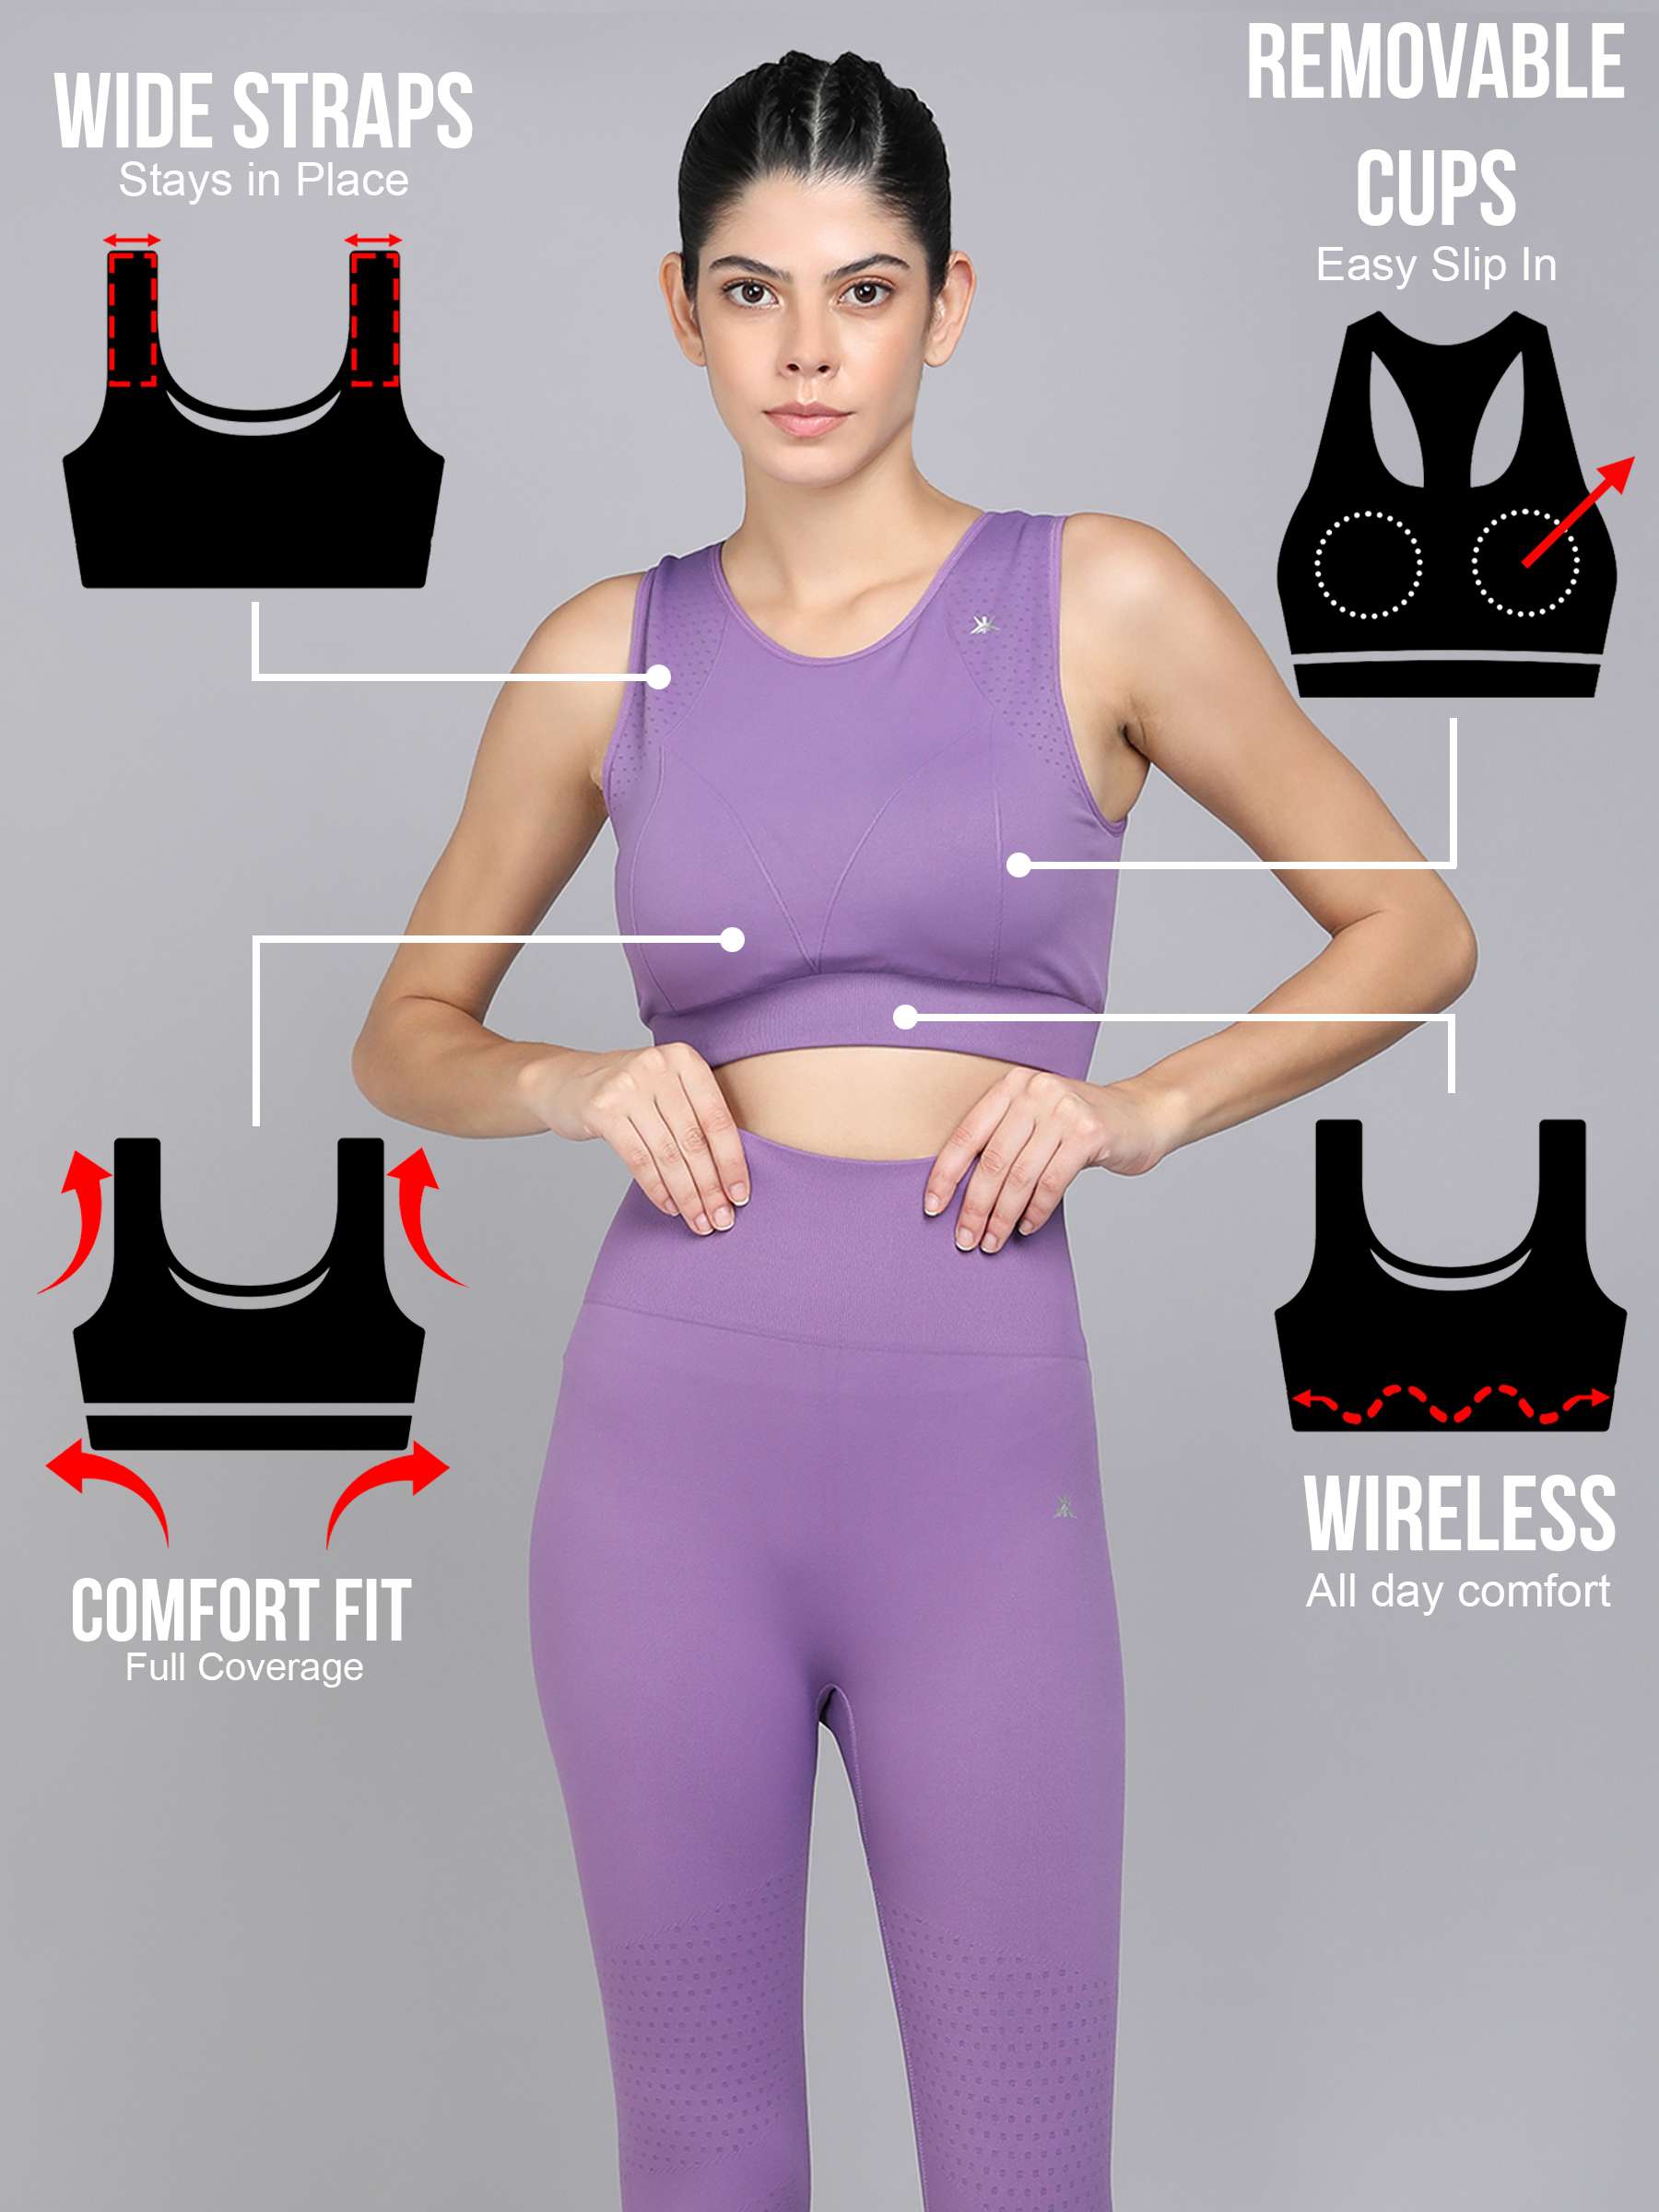 Buy Life & Jam Blue Women's Seamless Ribbed Waterproof Wireless Padded Sports  Bra and TOP for Gym, Travel, Trekking and Yoga (XS) at